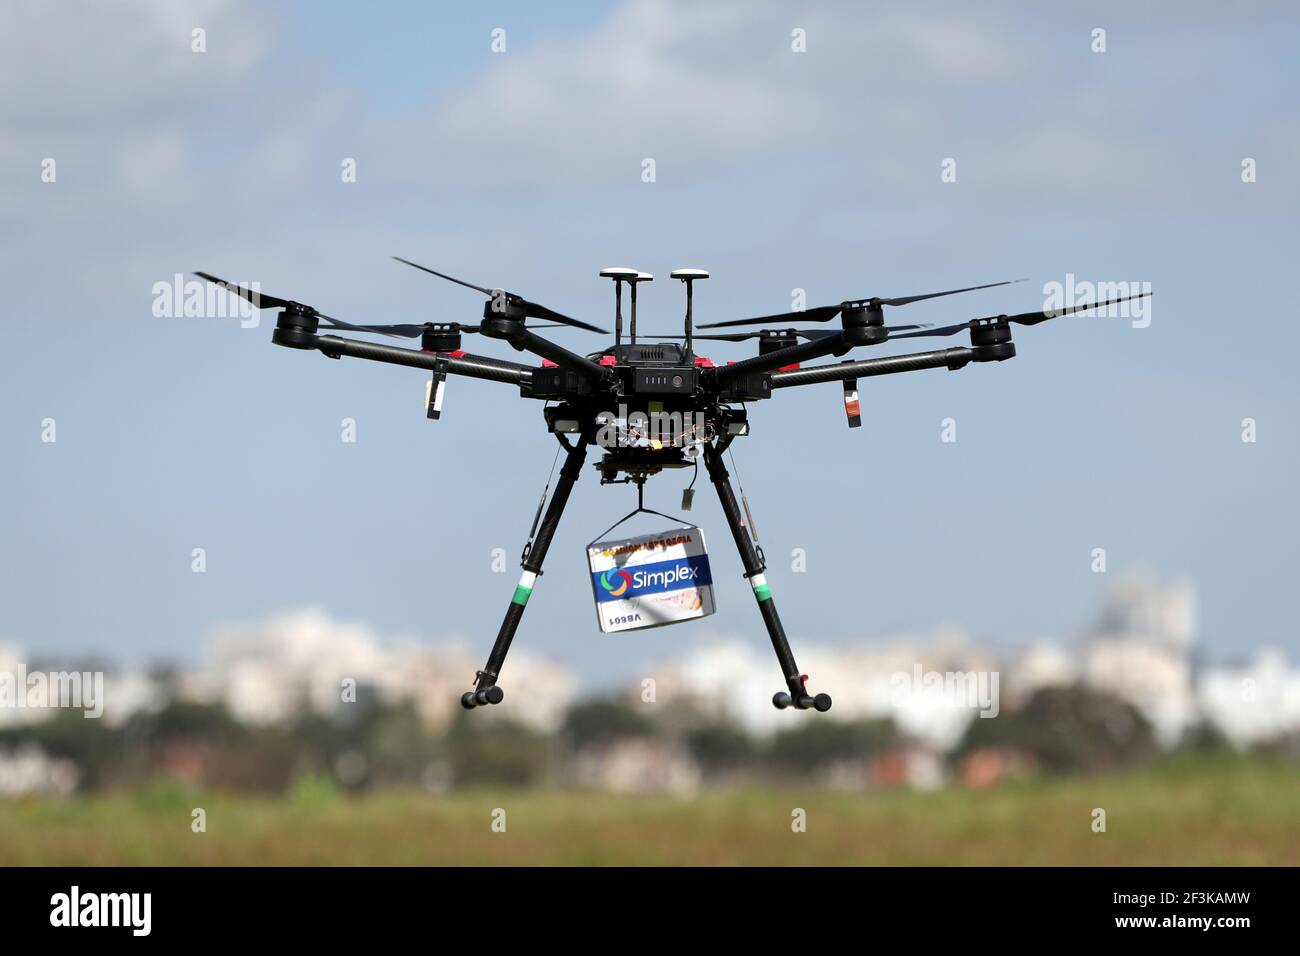 A delivery drone is seen midair during a demonstration whereby drones from various companies flew in a joint airspace and were managed by an autonomous control system in Haifa, in an open area near Hadera, Israel March 17, 2021. REUTERS/Ronen Zvulun Stock Photo